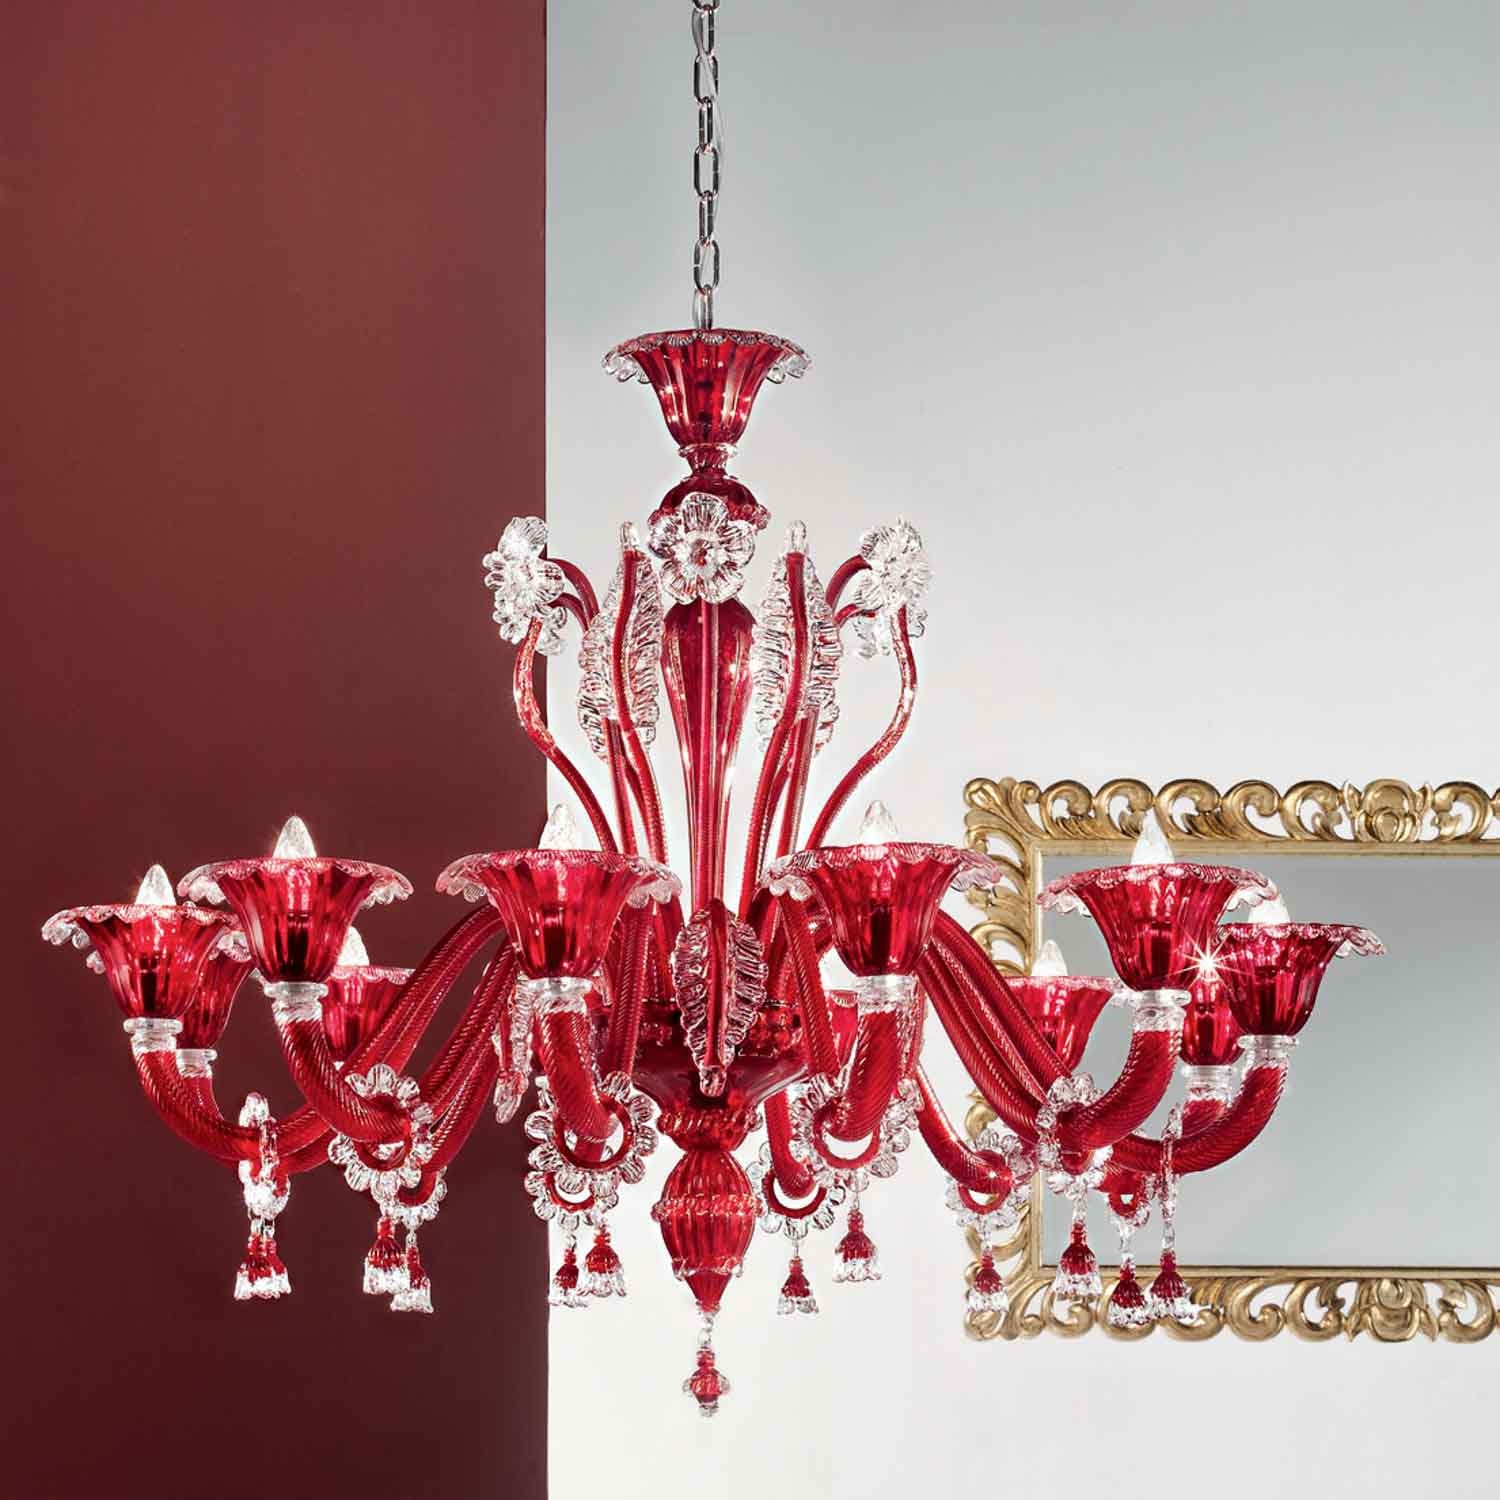 How To Use Murano Glass Lighting at Home?